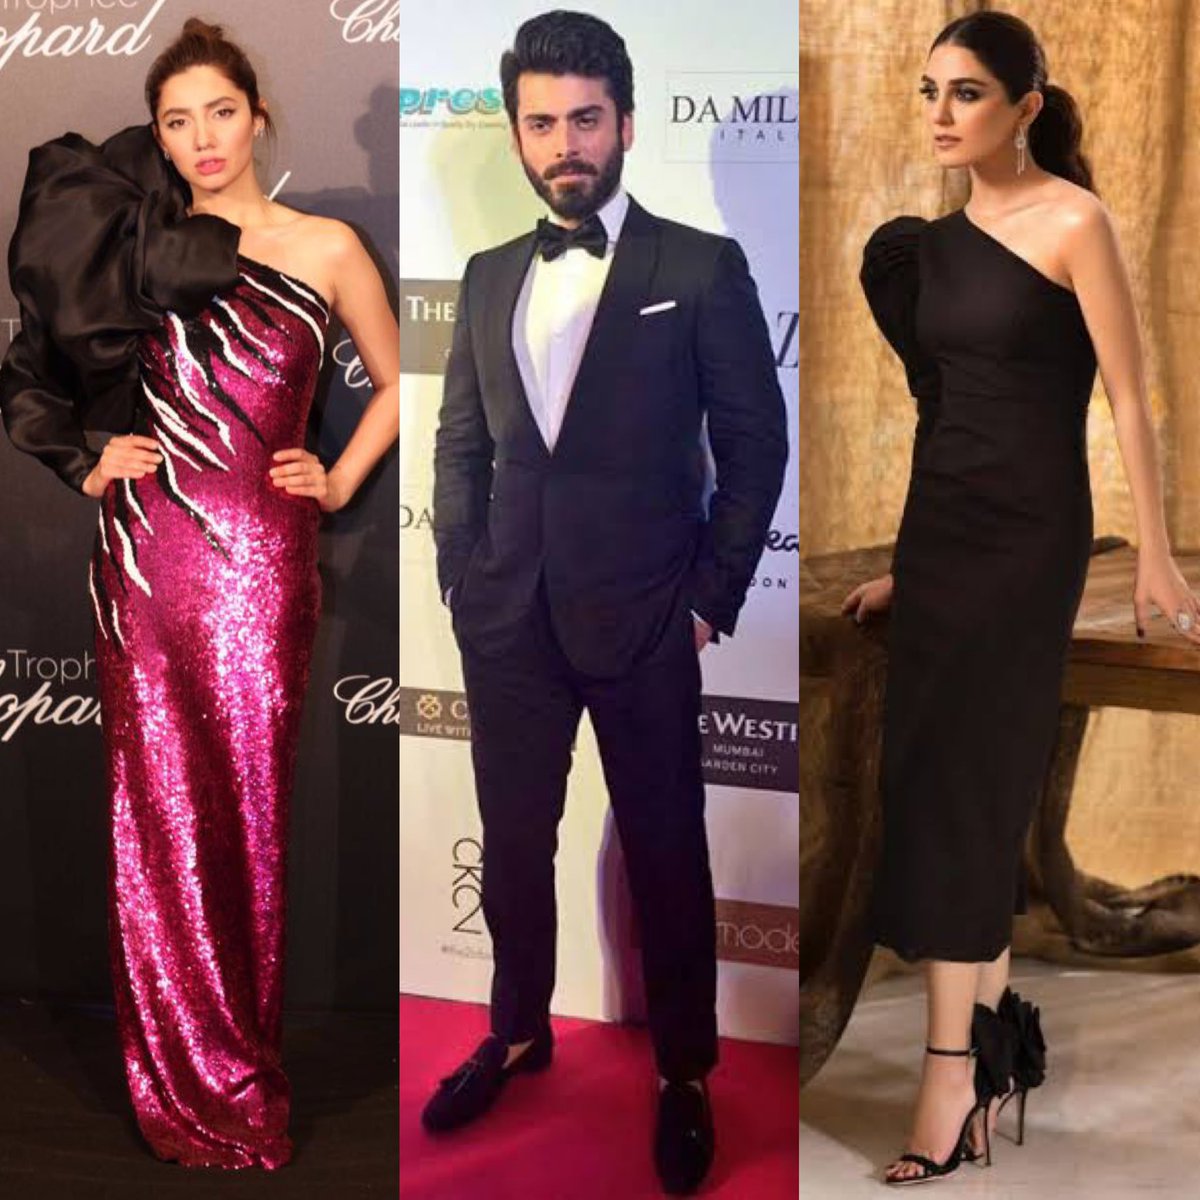 #HUMTV has significant sway over Pakistani celebrities but curiously, couldnt they manage to get Mahira, Fawad, Maya, Ayeza and Hamza on board for their event? The so called style awards fell flat for me due to the absence of big names. 

#MahiraKhan #FawadKhan #MayaAli